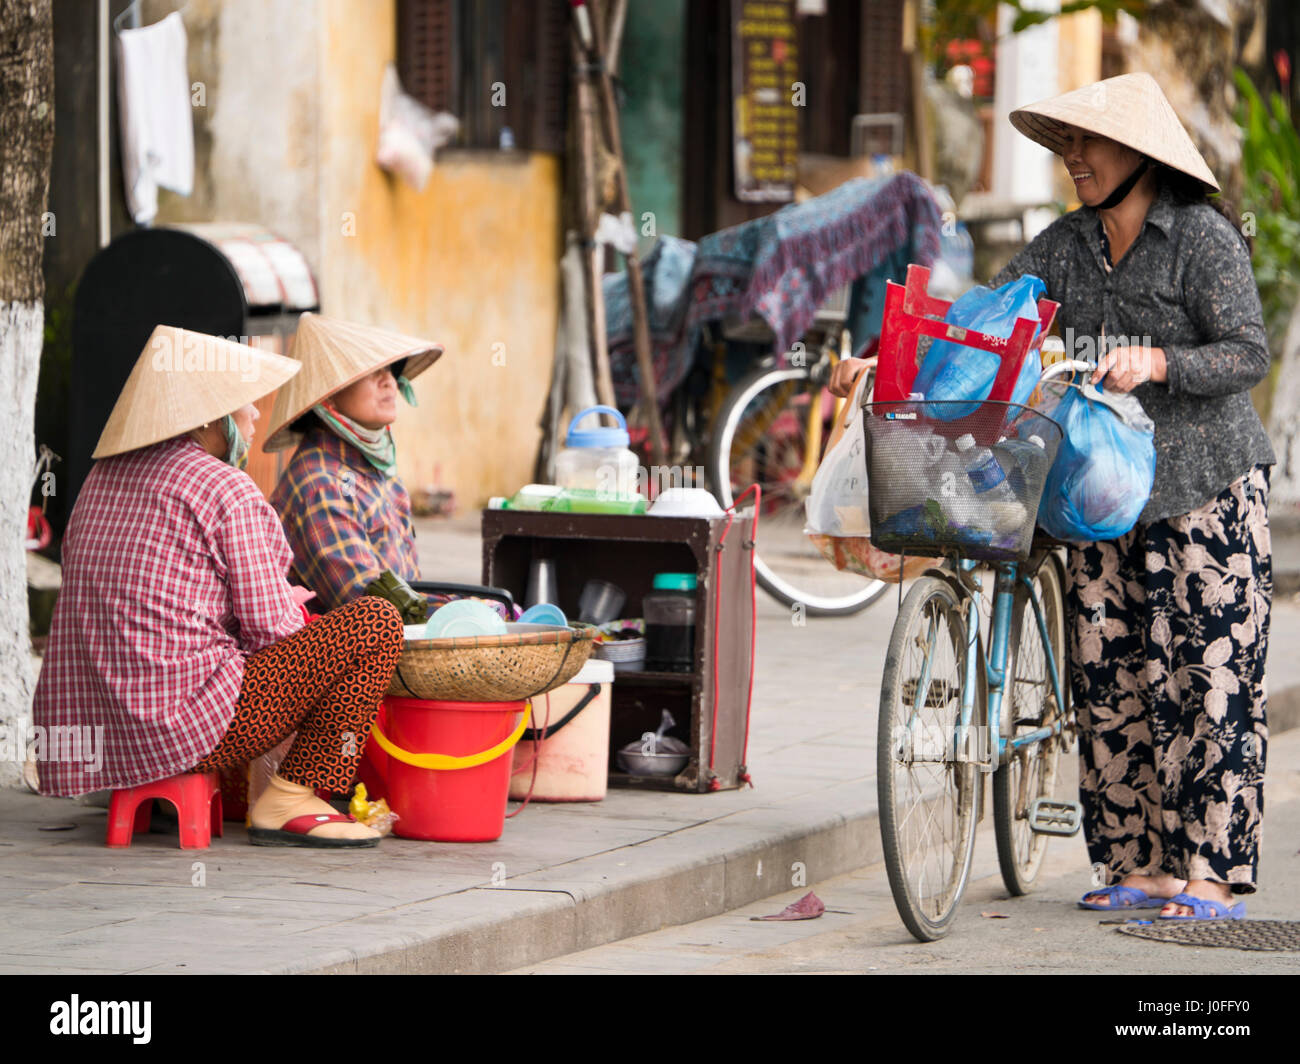 Horizontal view of ladies in traditional conical hats having a gossip on the streets in Hoi An, Vietnam. Stock Photo